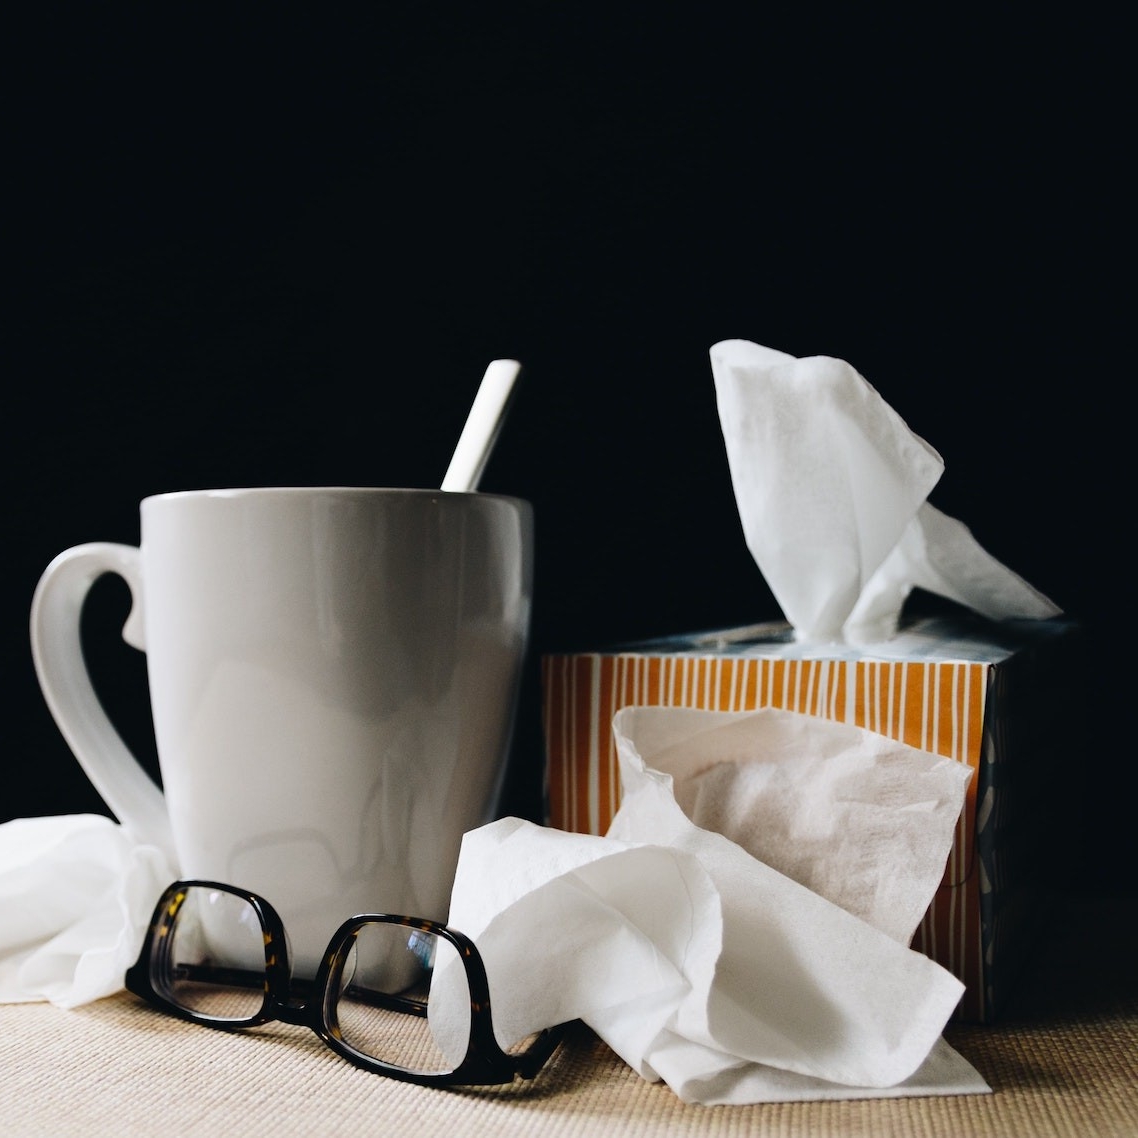 cold and flu tissue, glasses, and tea